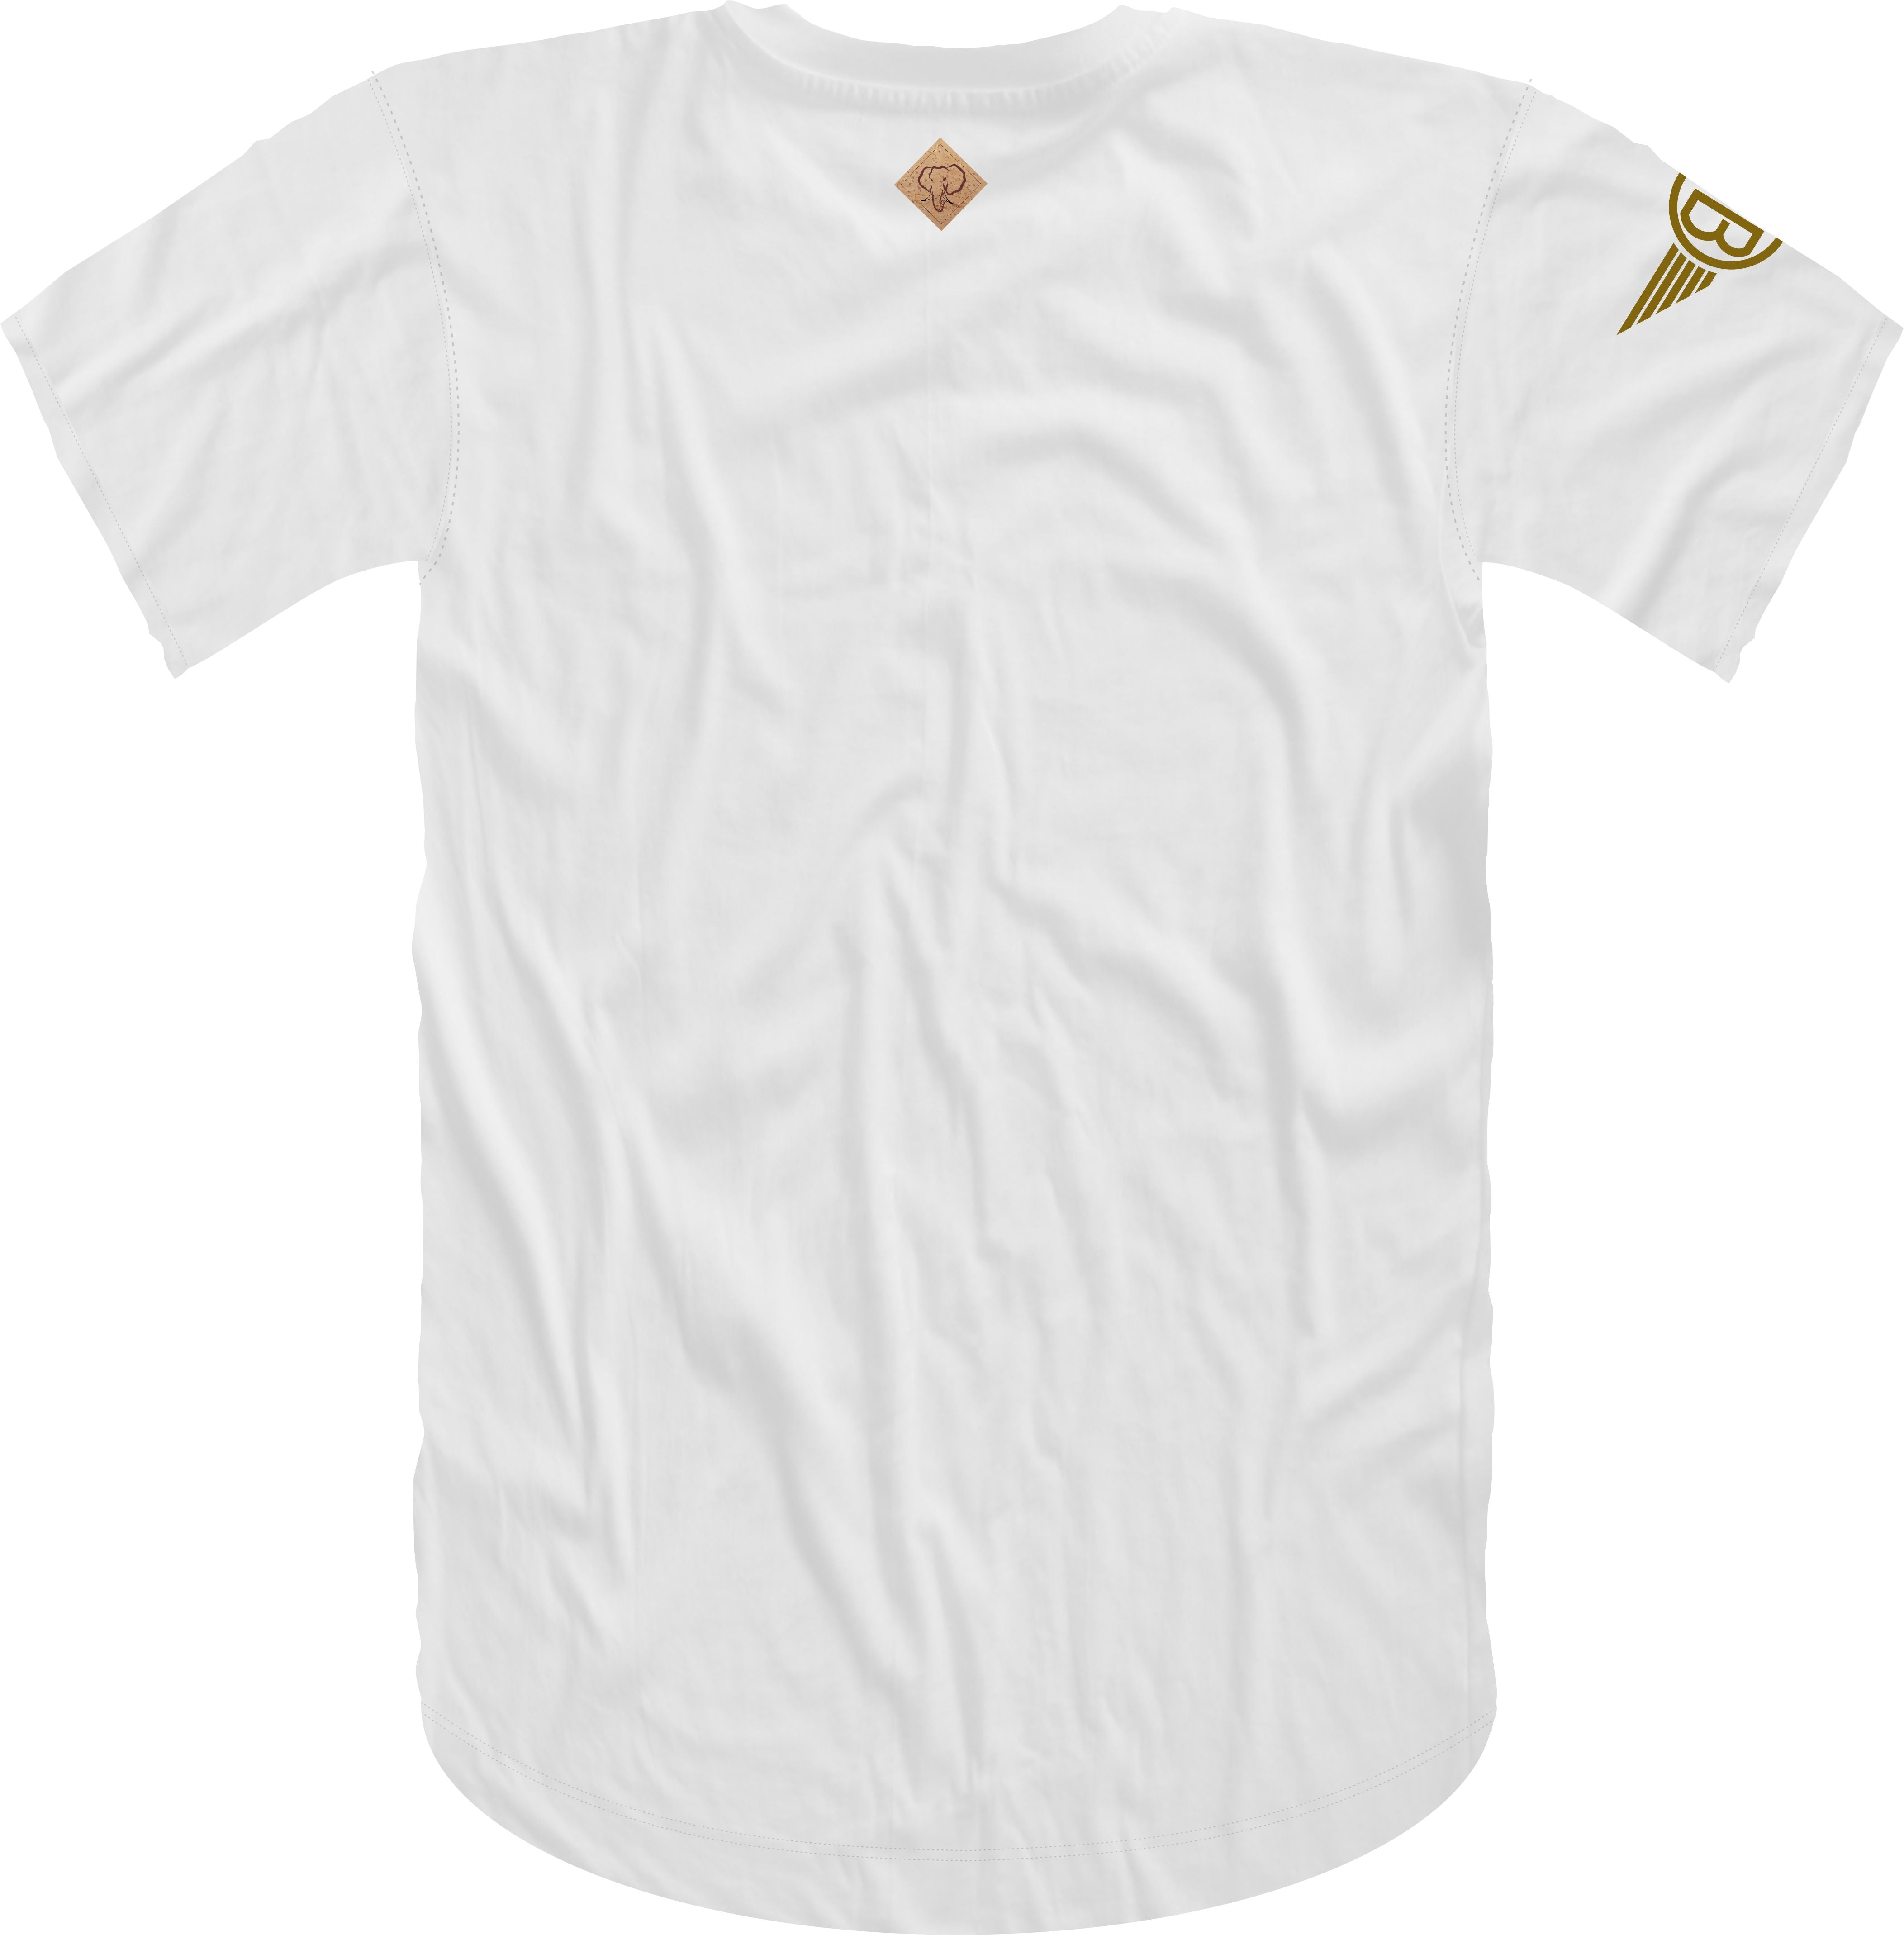 Oversized Elephant Head Tee in White with Gold Embroidery